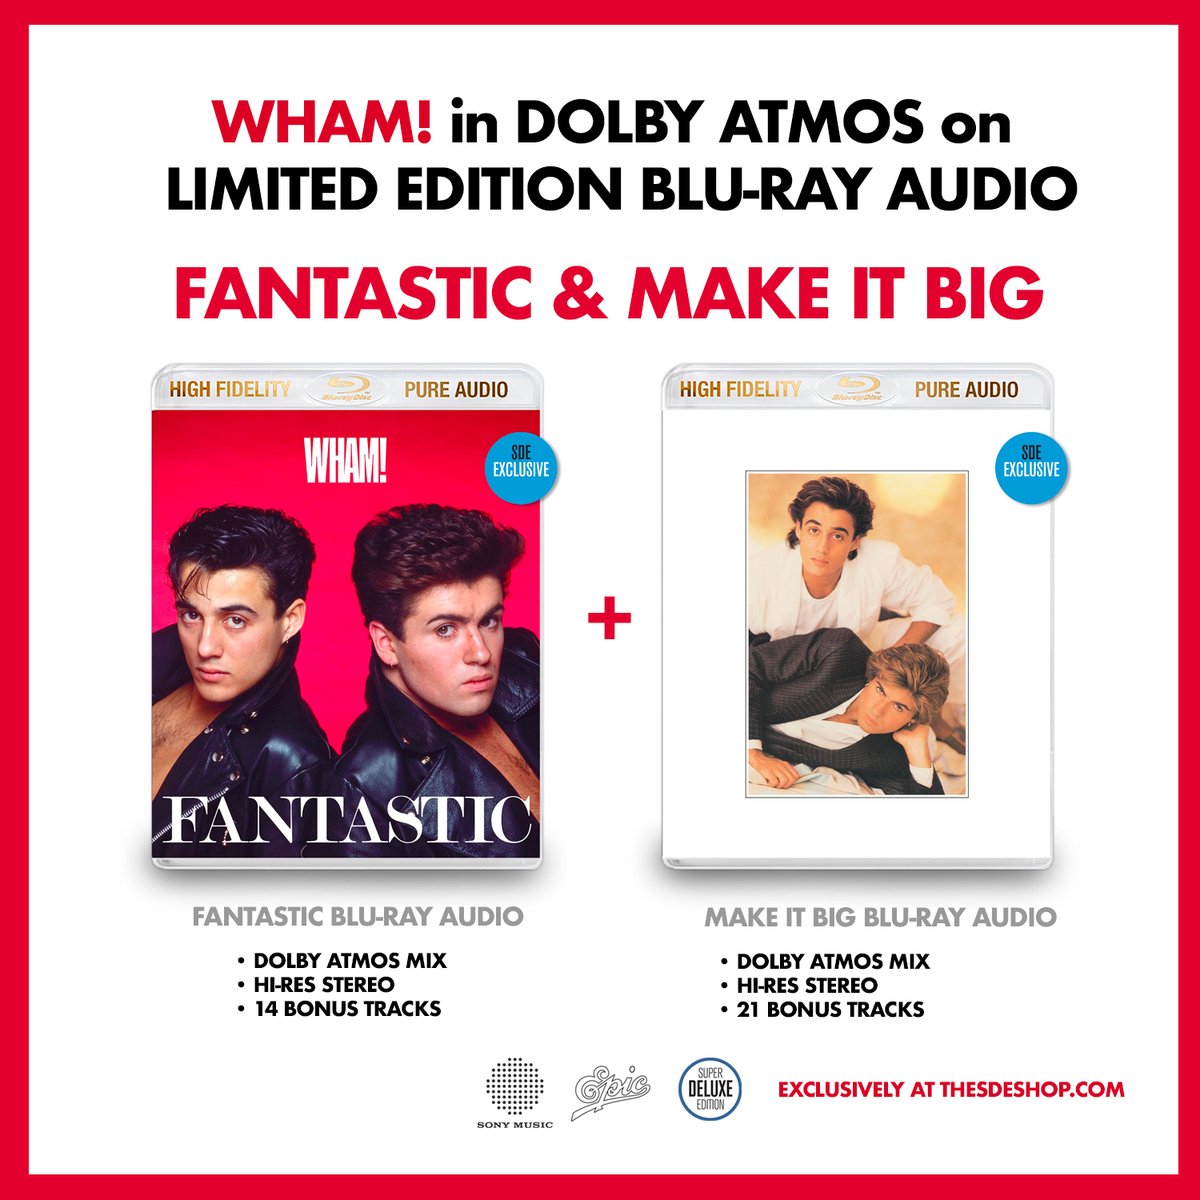 Enjoy Wham!'s classic studio albums, 'Fantastic' and 'Make It Big', in immersive #DolbyAtmos via these two blu-ray audios. Available exclusively via @thesdeshop, these also feature hi-res stereo & rare bonus tracks. Available for a limited time only! wham.lnk.to/VinylReleases